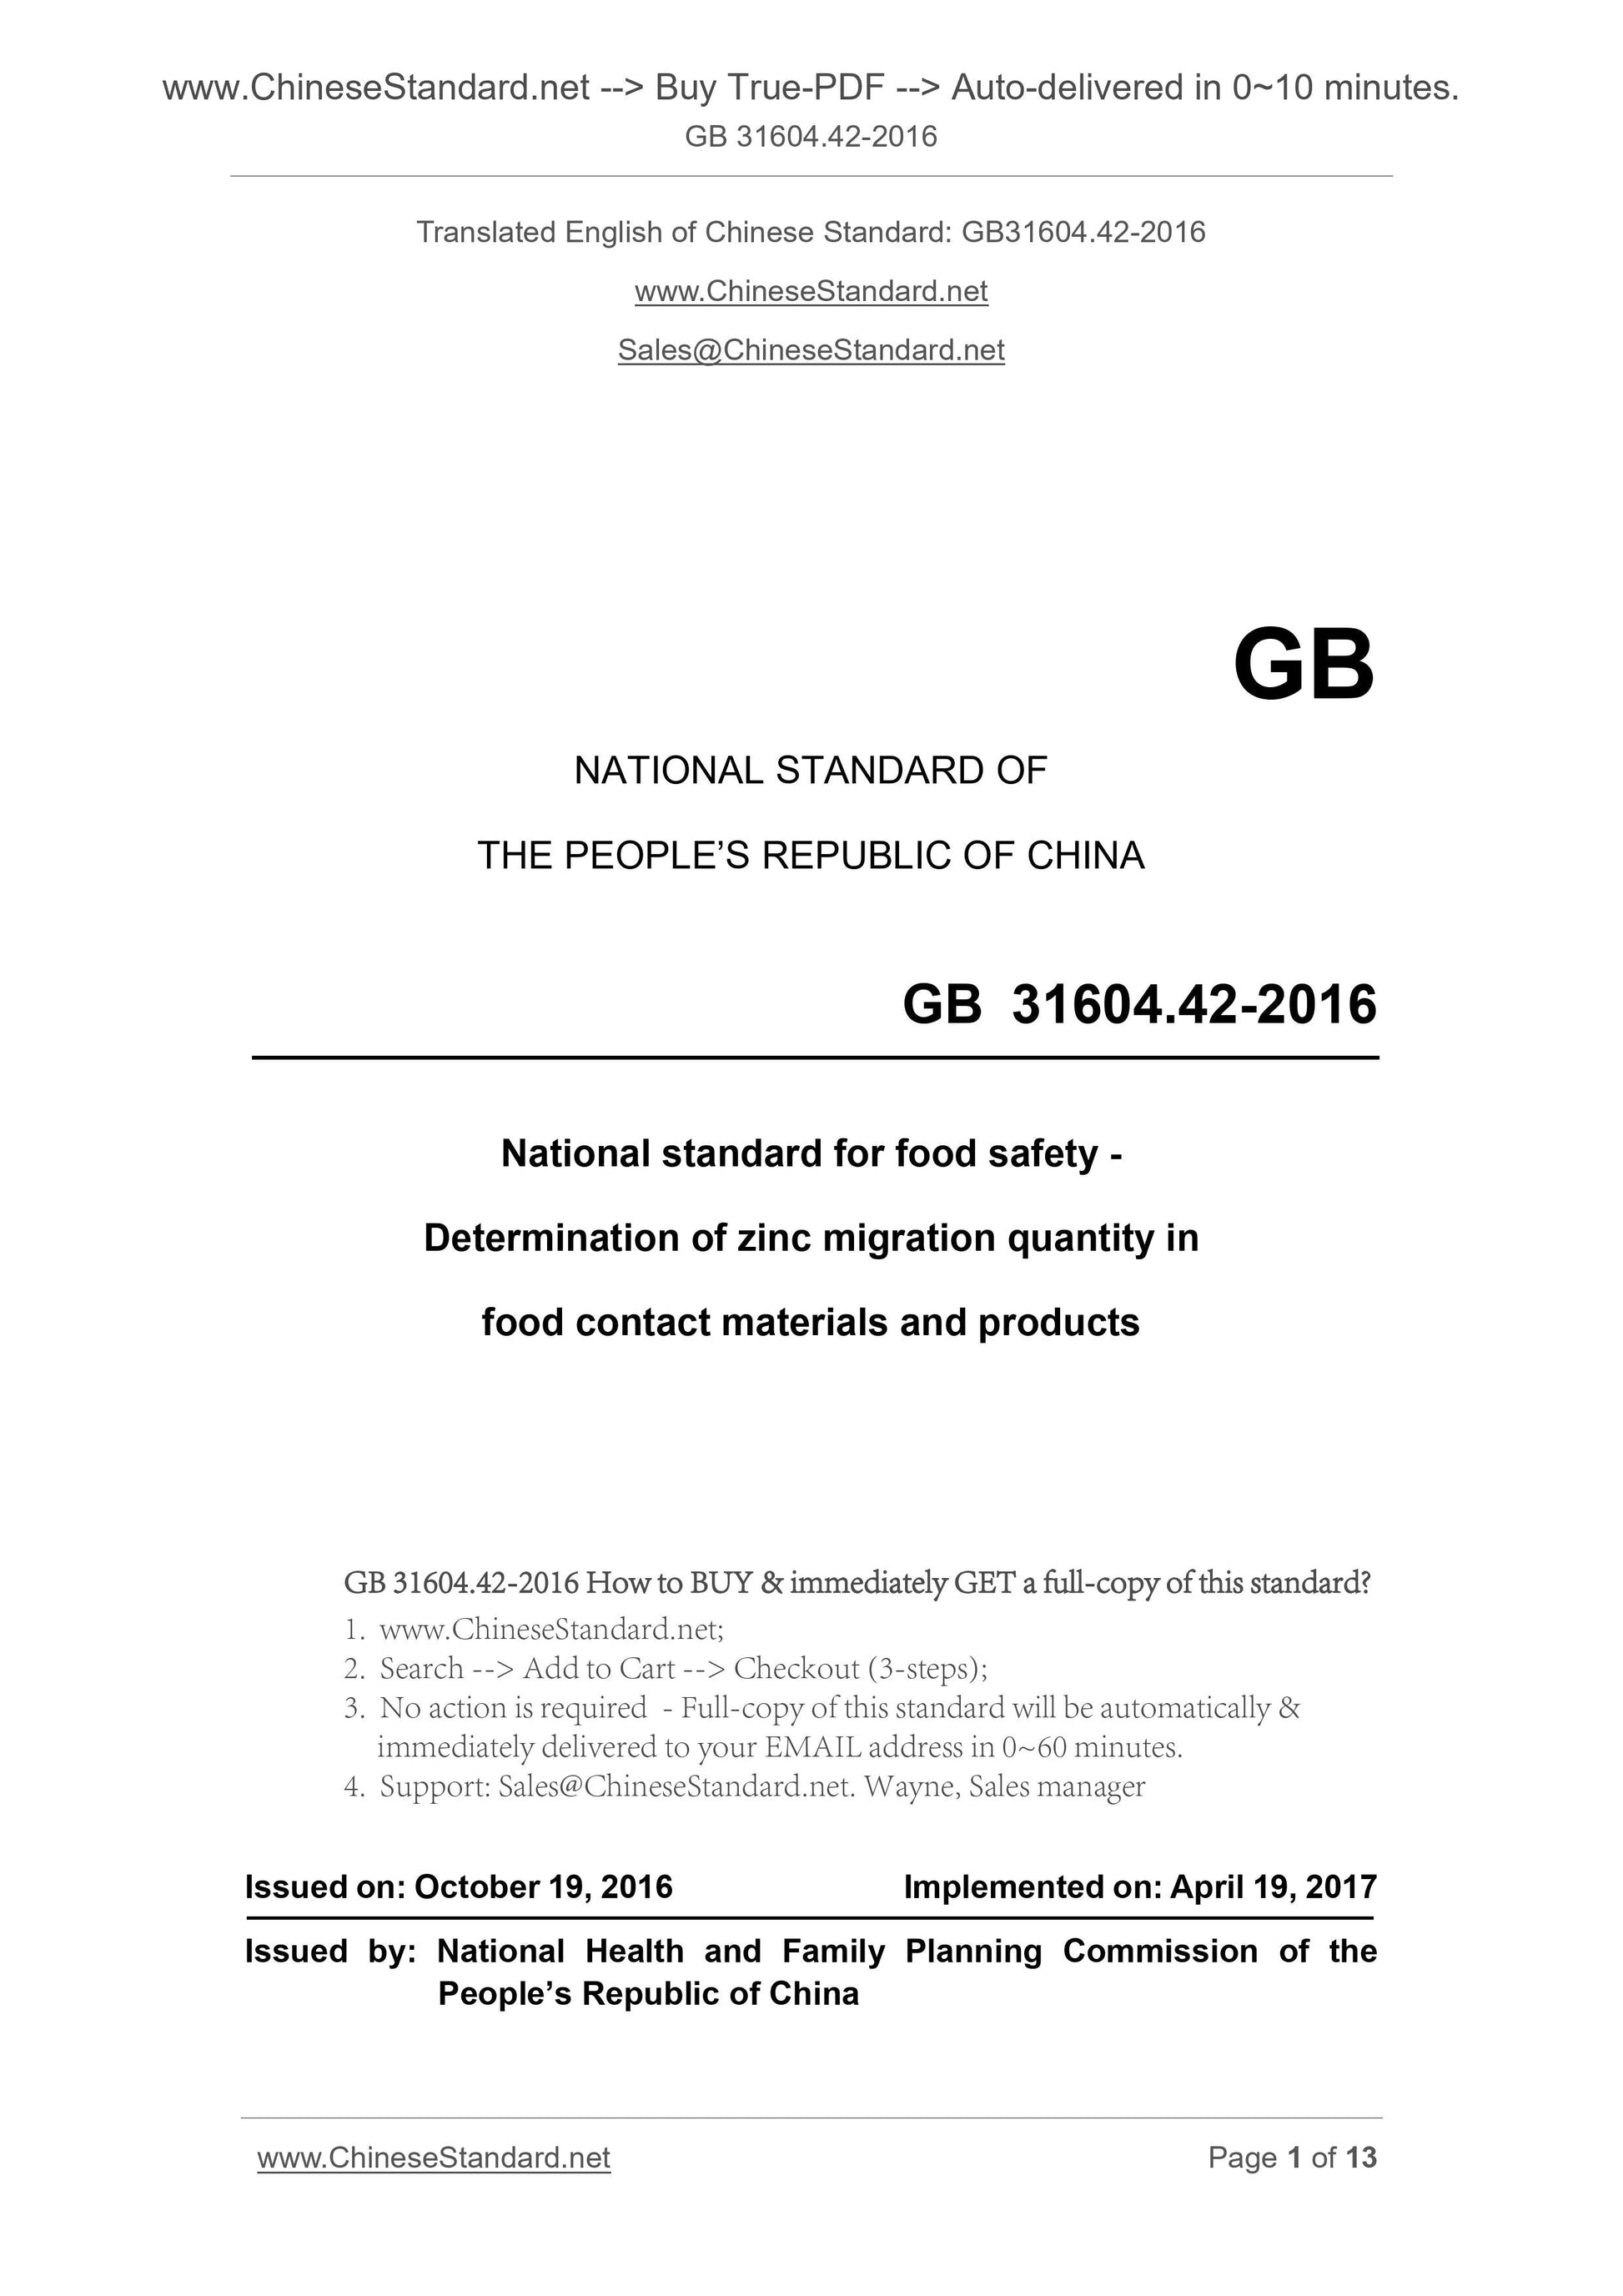 GB 31604.42-2016 Page 1